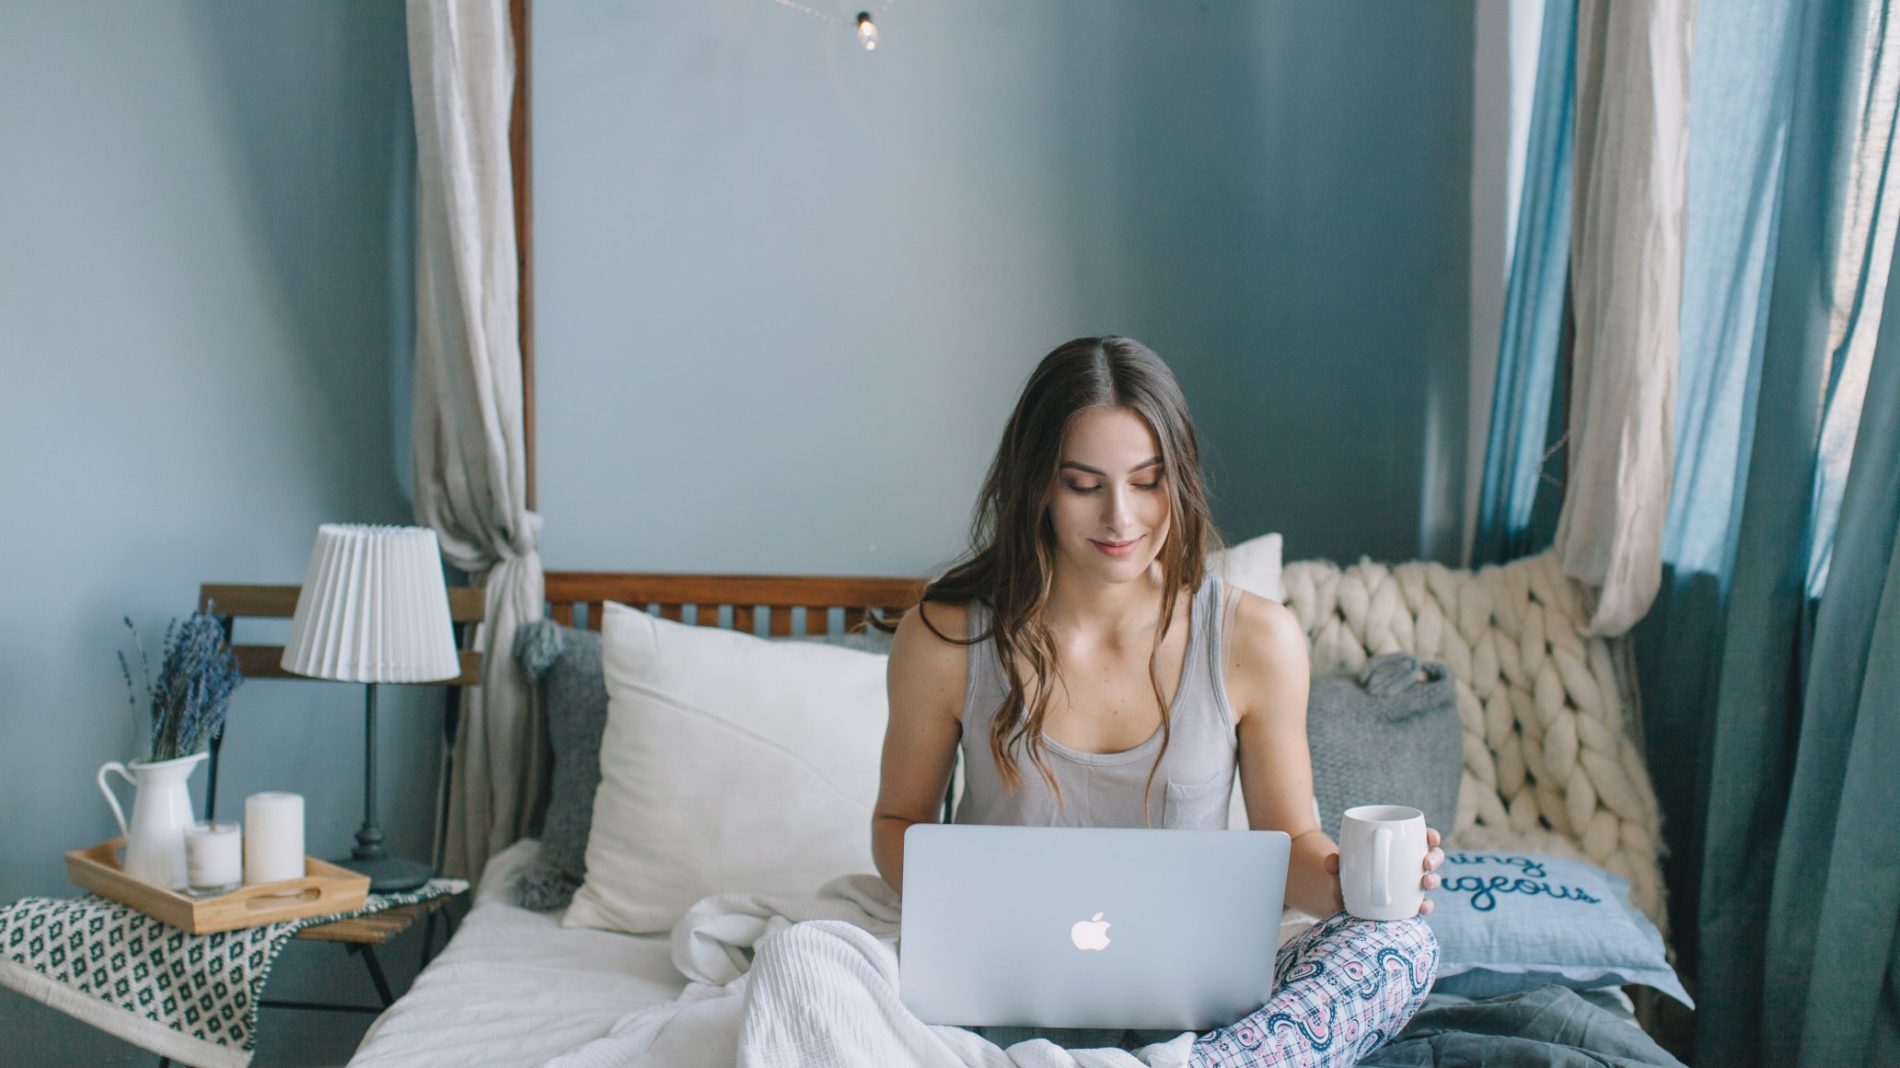 bedroom-morning-girl-woman-working-from-home-millennial-modern-interior-using-technology_t20_ZVa9Kn